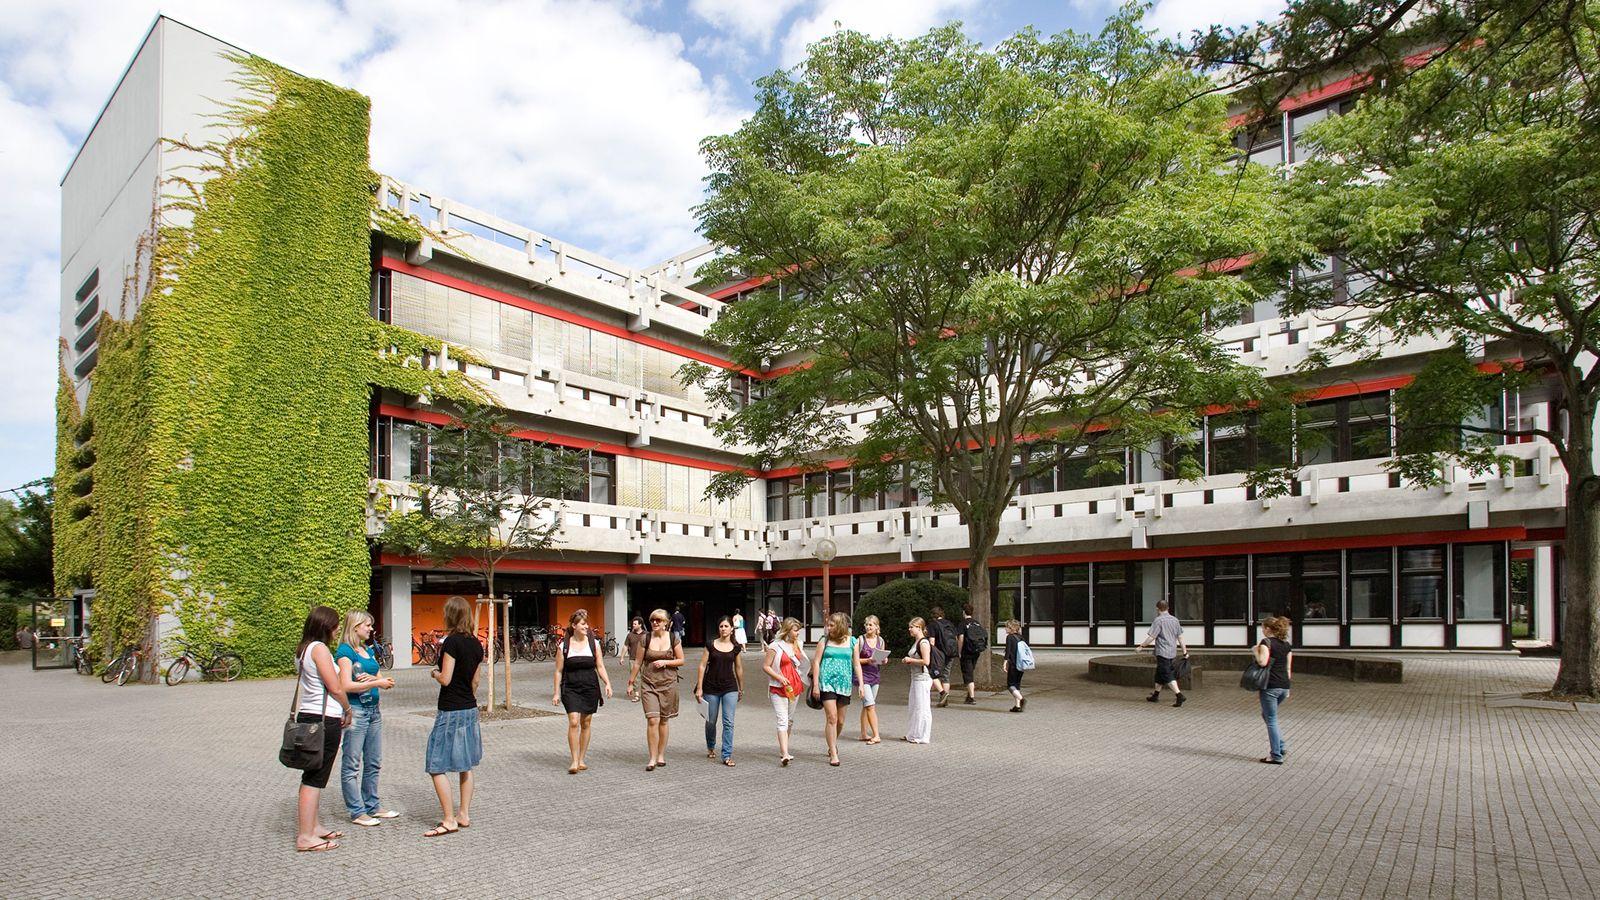 Photo of Pädagogische Hochschule campus in Karlsruhe, Germany